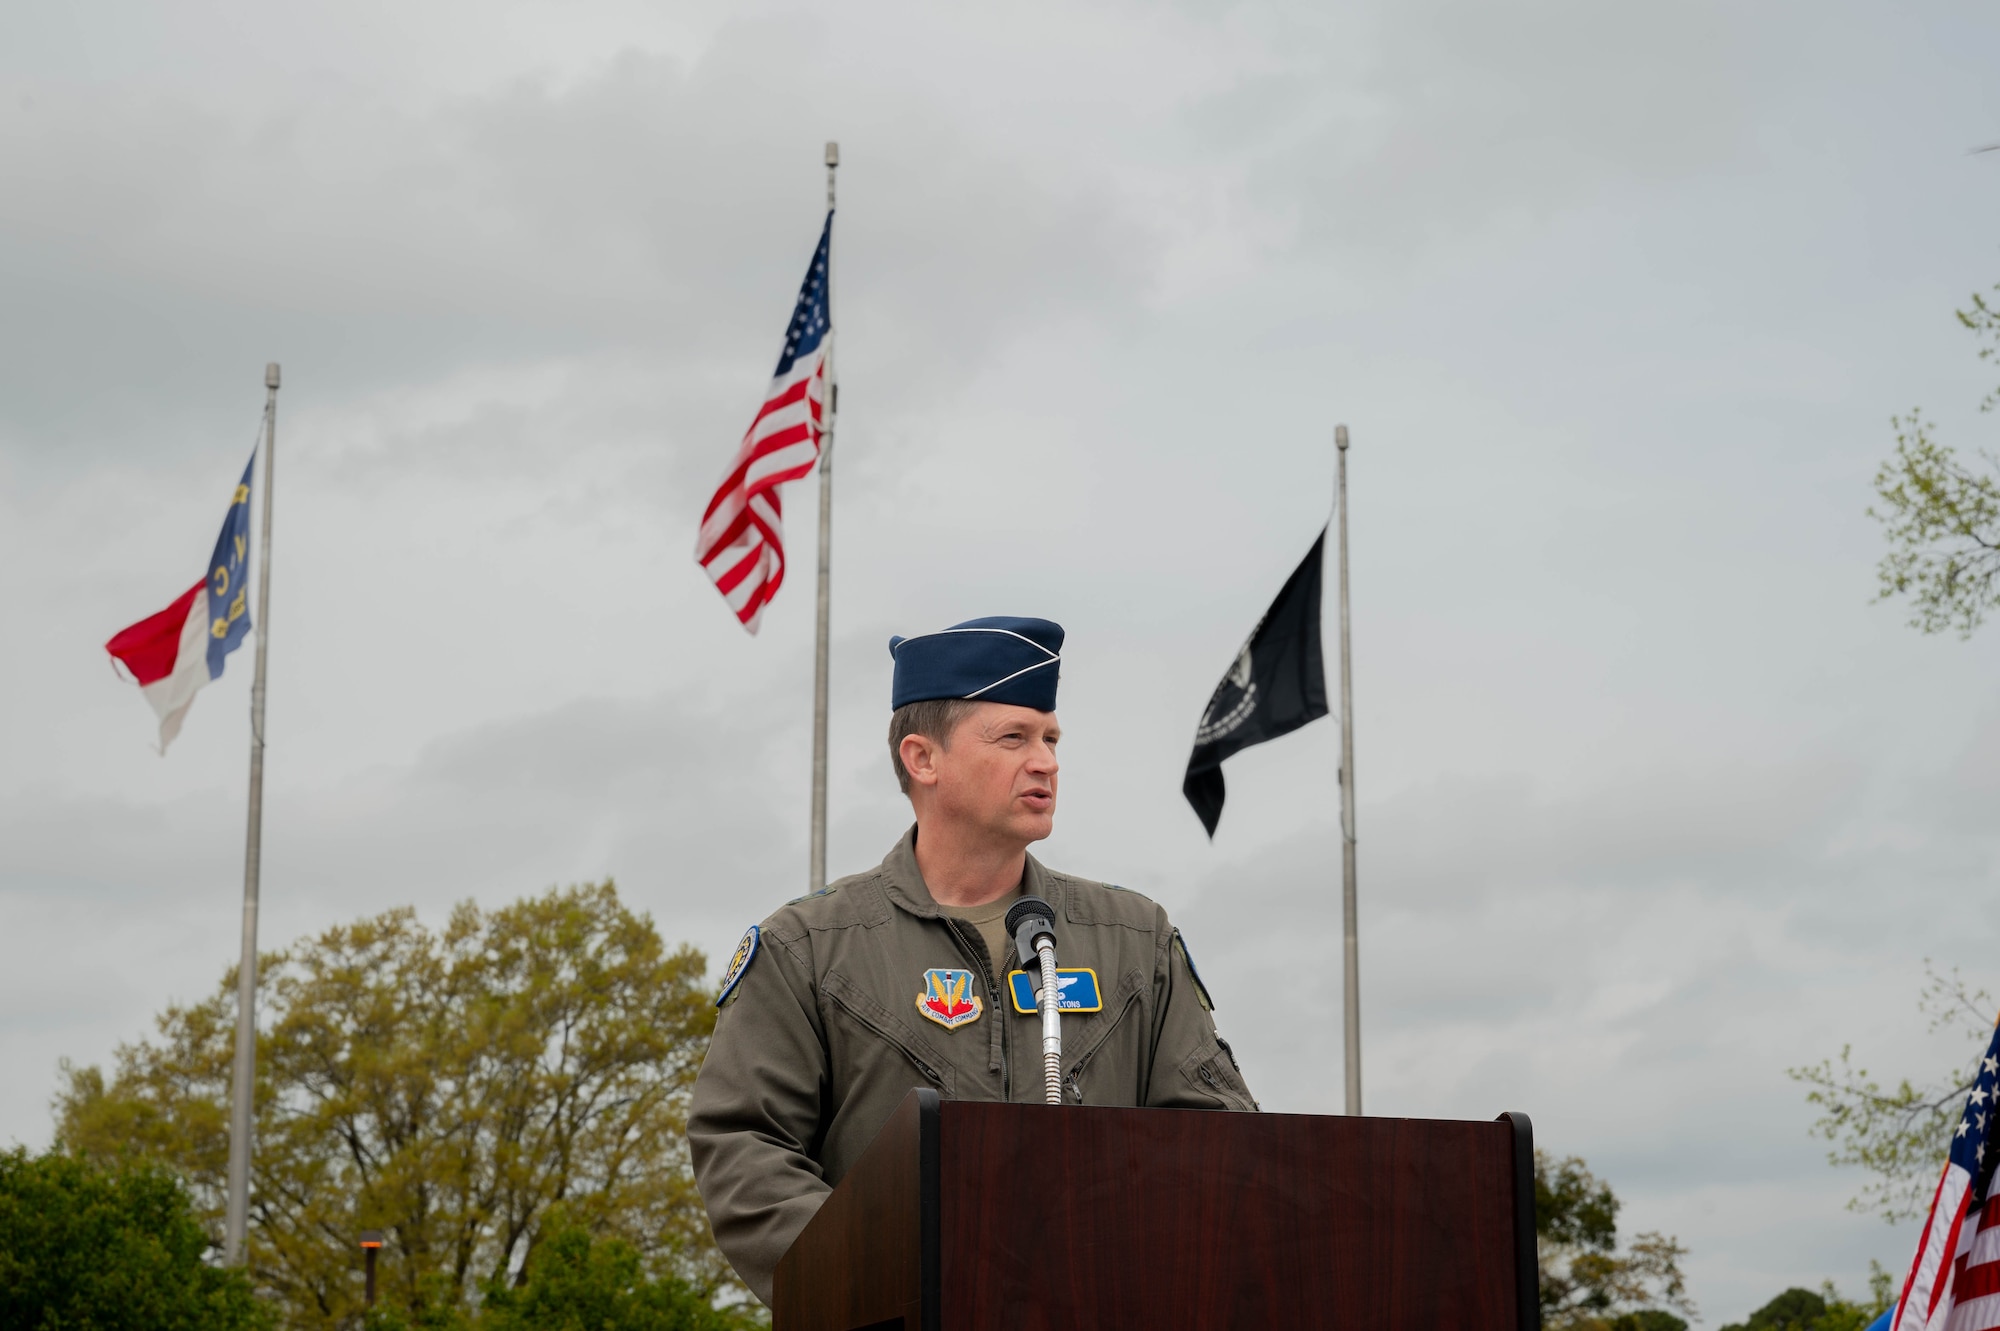 Maj. Gen. David Lyons, 15th Air Force commander, highlights the importance of integral leadership and transfer of power during the 4th Fighter Wing change of command, at Seymour Johnson Air Force Base, North Carolina, March 22, 2024. Change of command ceremonies allow Air Force leadership to seamlessly transfer authority while meeting their new Airmen across the wing. (U.S Air Force photo by Airman 1st Class Rebecca Sirimarco-Lang)